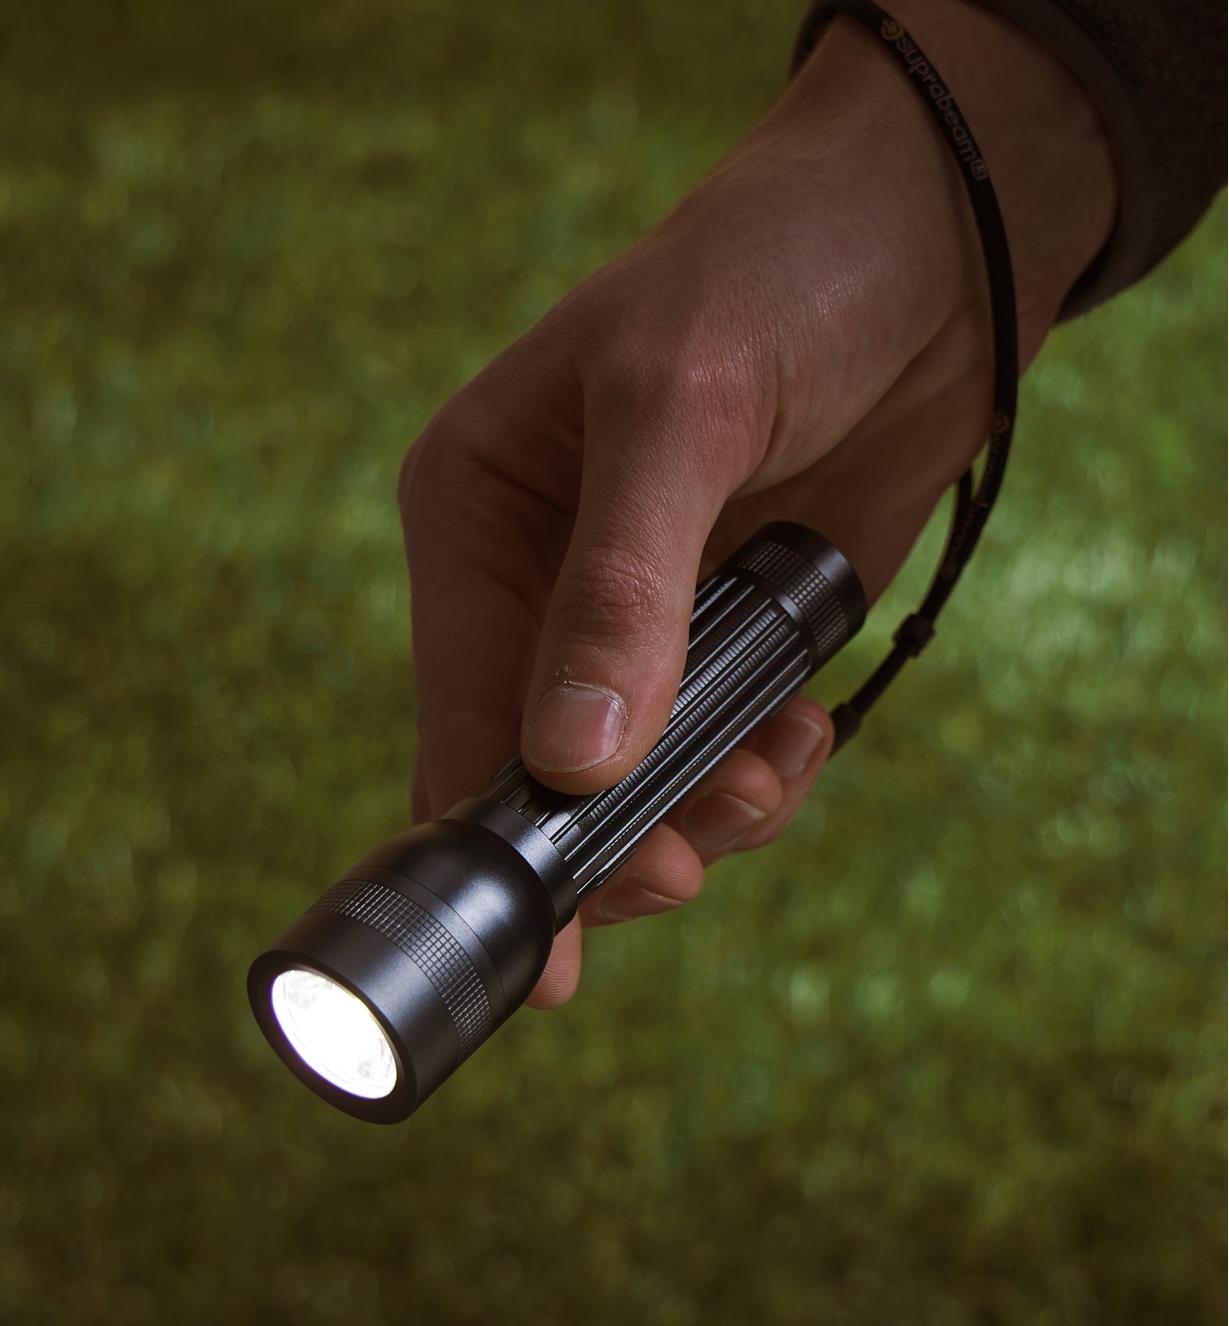 Carrying a flashlight in the darkness